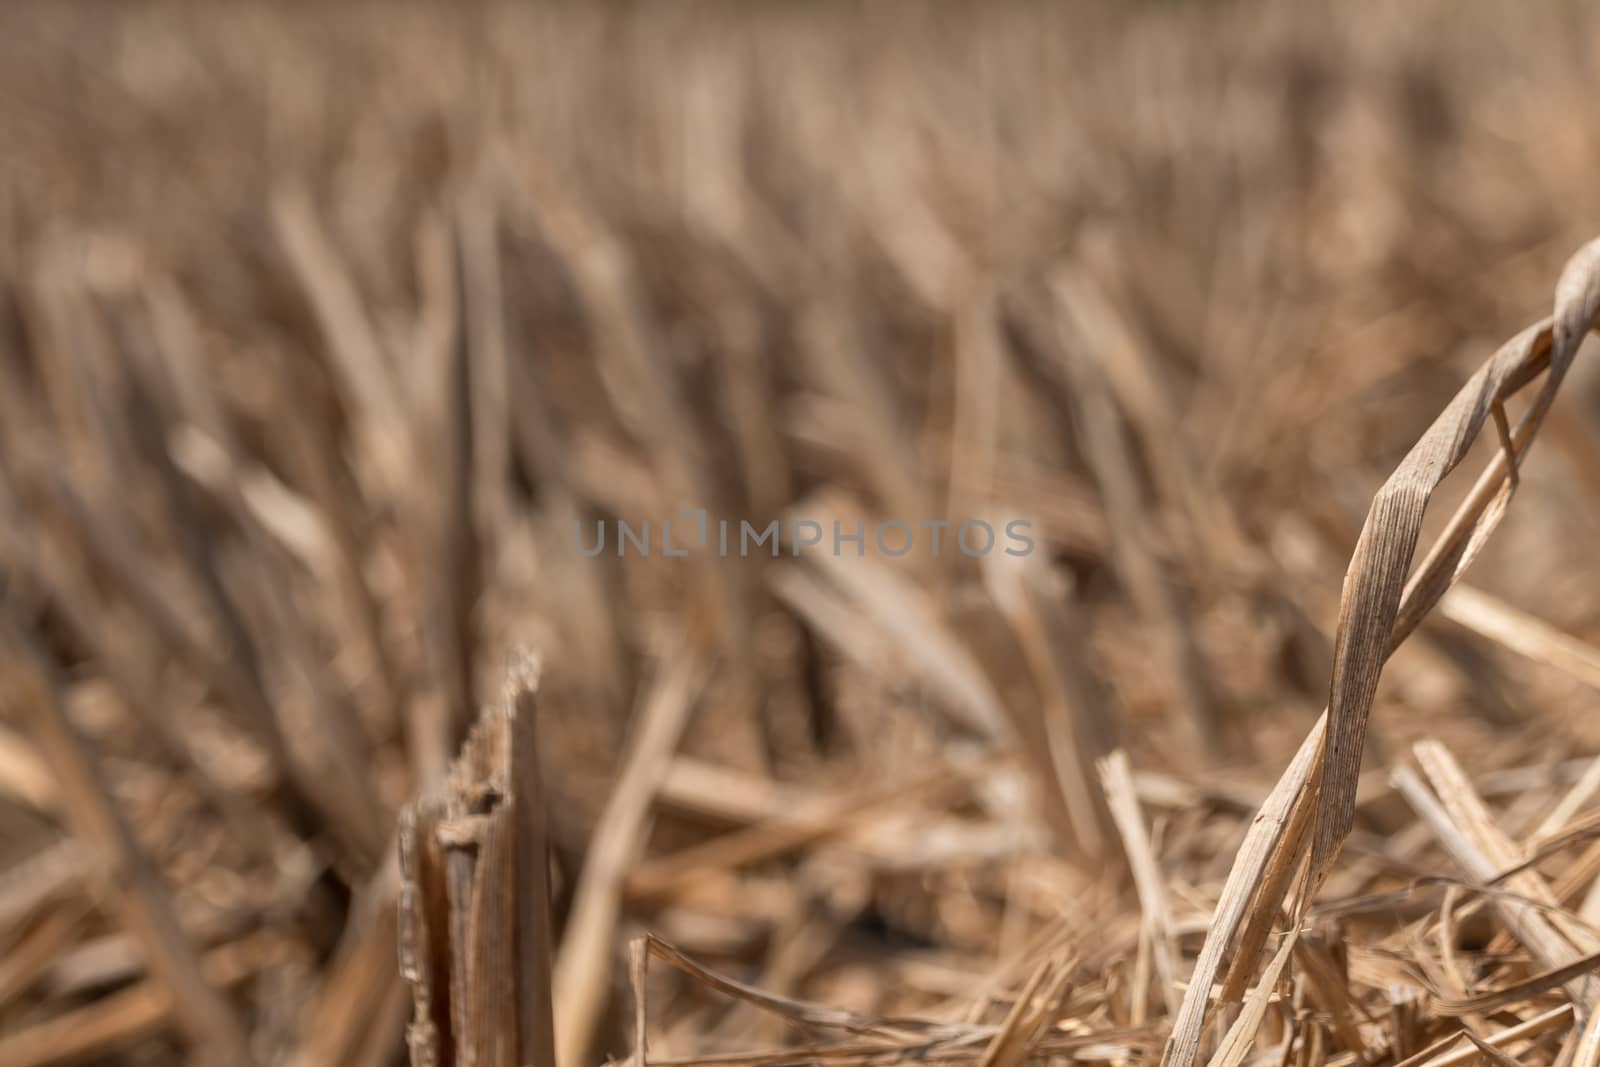 Dried rice stubble in the agricultural fields after harvest